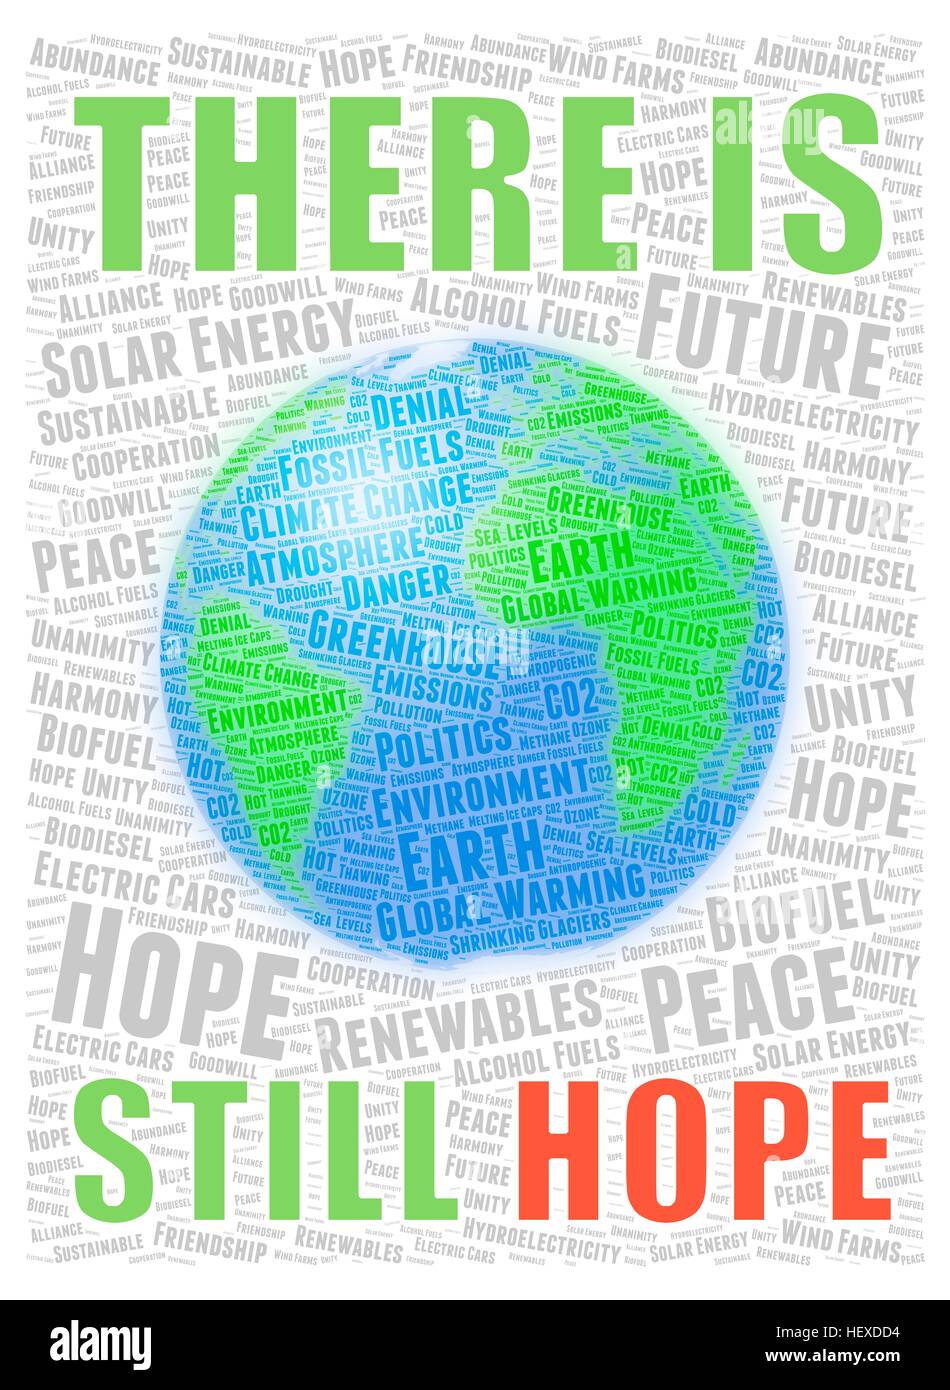 Illustration in the form of a word cloud, depicting global warming. Words related to global warming (e.g. environment, politics, sea levels etc) form the globe of the Earth. Meanwhile, surrounding this is a background in grey made up of more optimistic words, like hope, sustainable, biofuels, solar energy, etc. Stock Photo